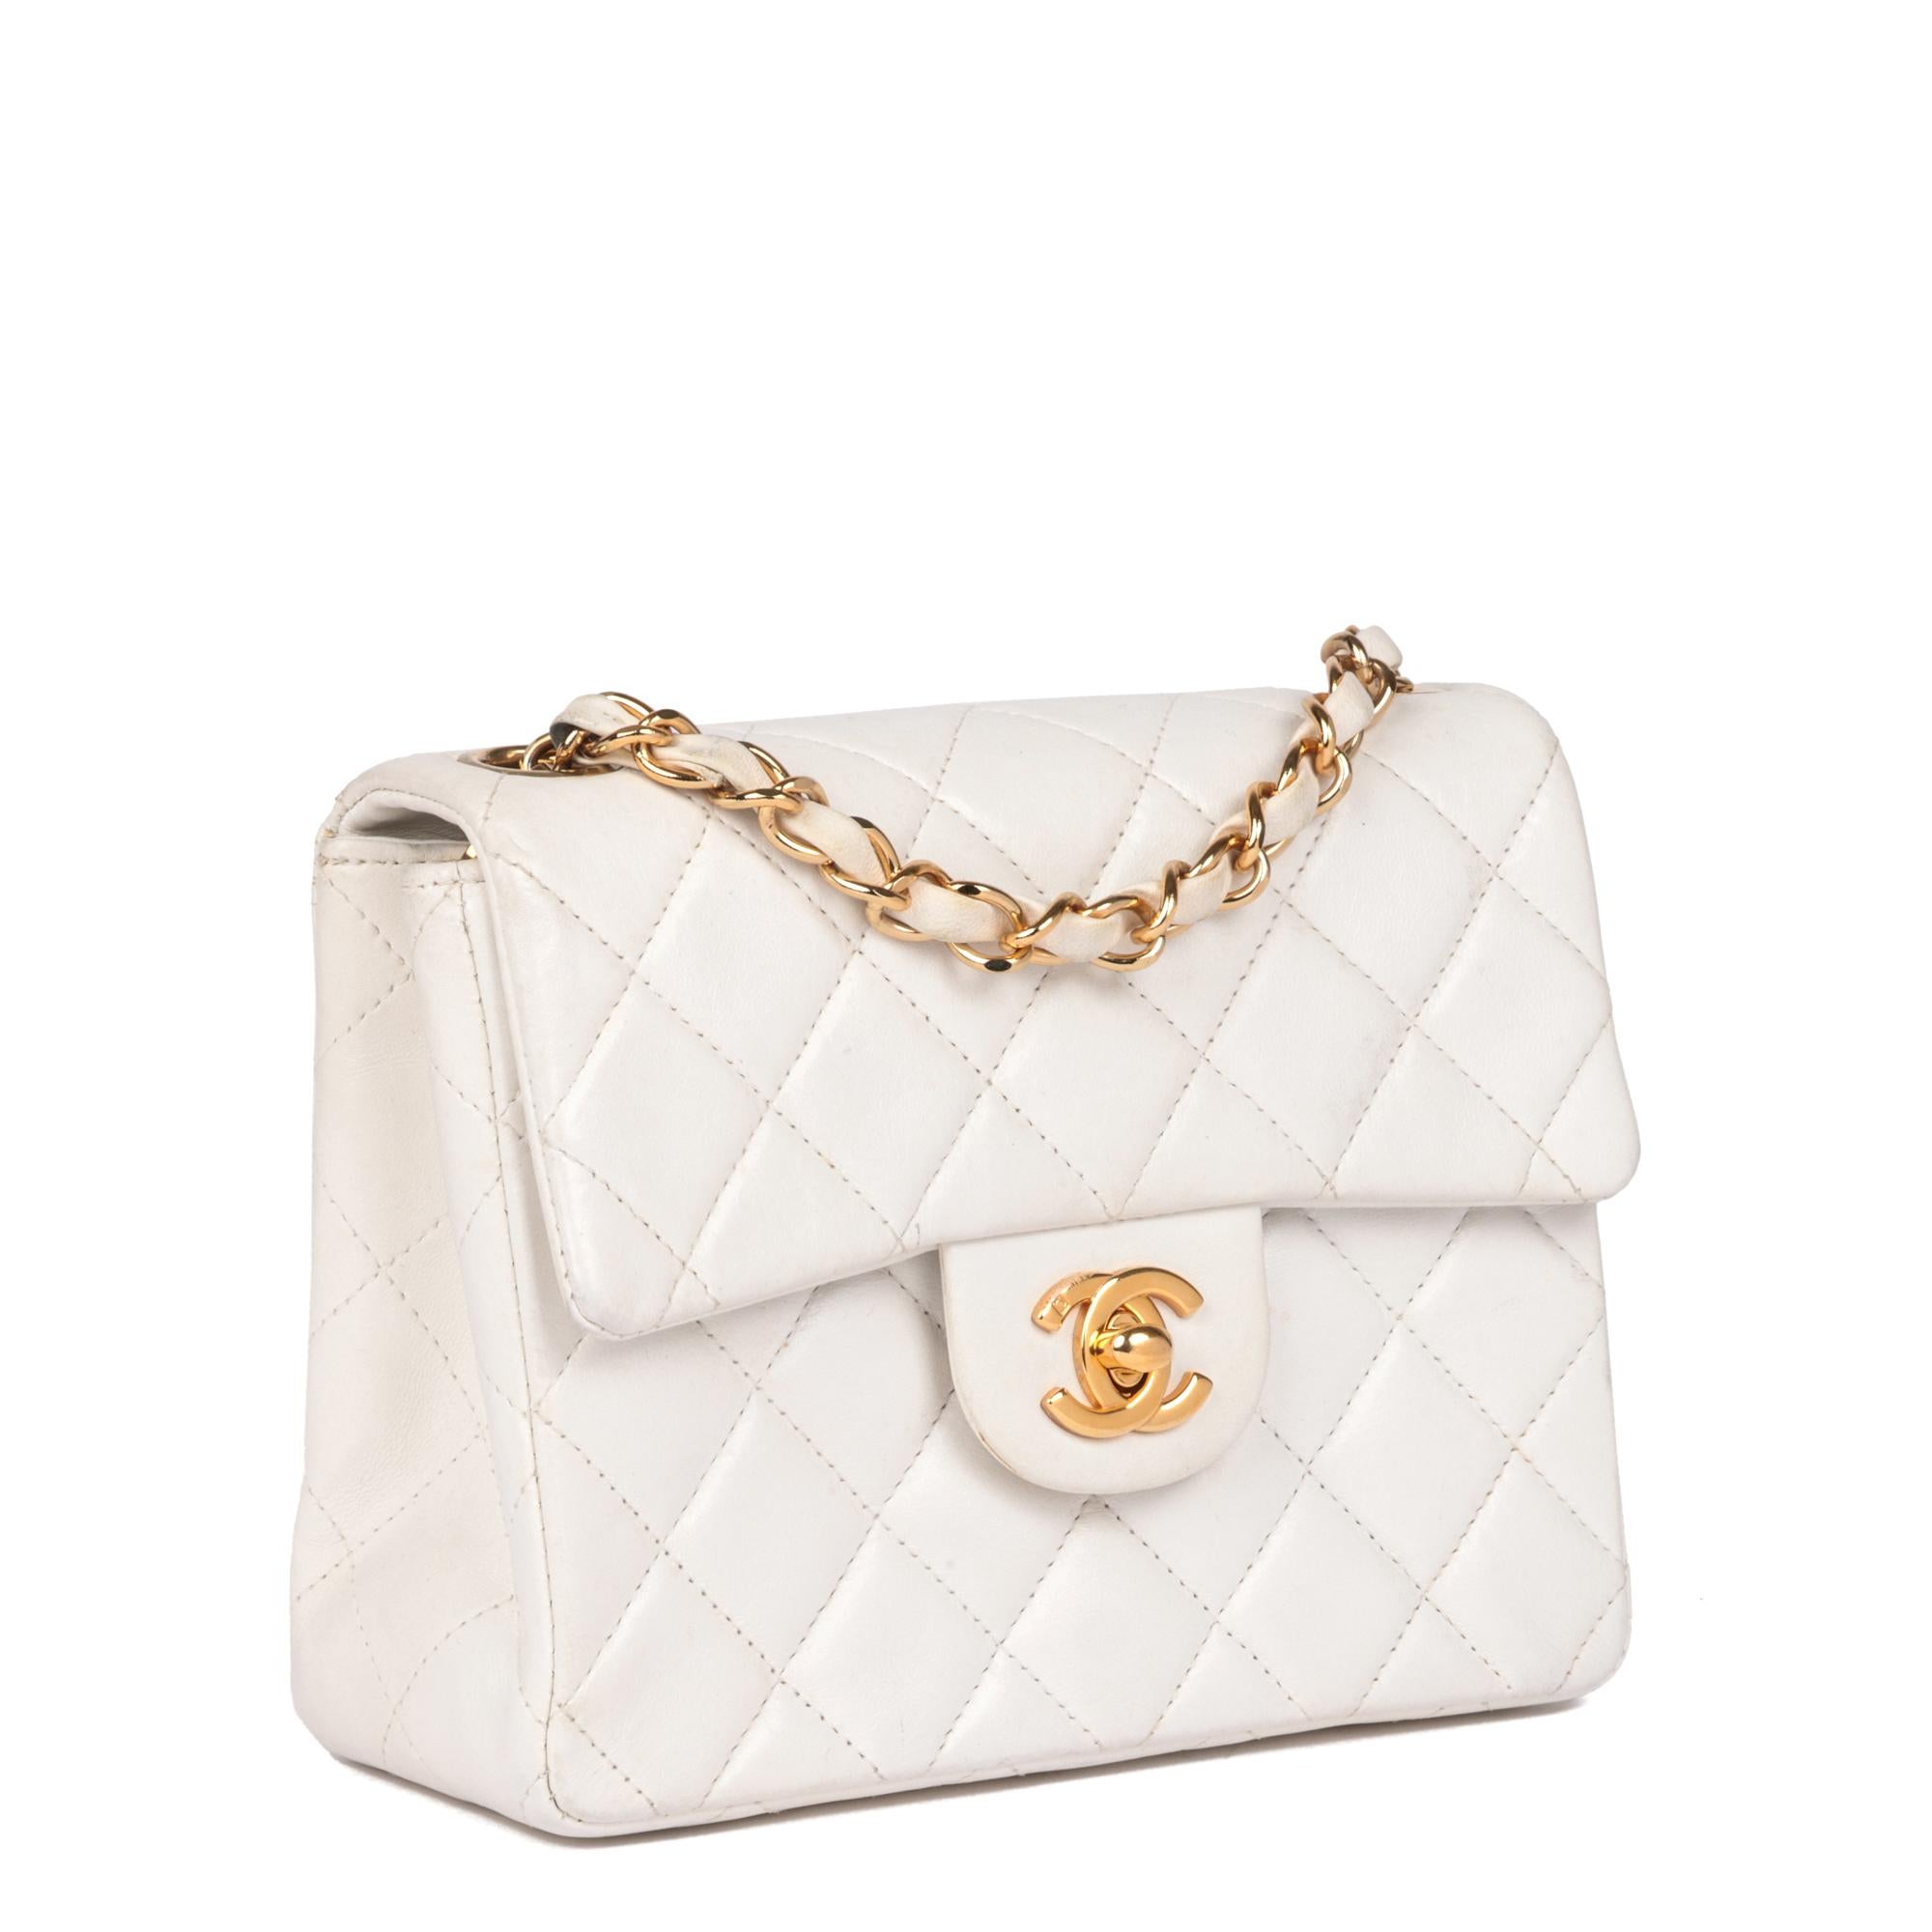 CHANEL
White Quilted Lambskin Vintage Square Mini Flap Bag

Xupes Reference: HB5128
Serial Number: 5576224
Age (Circa): 1999
Accompanied By: Chanel Dust Bag, Authenticity Card
Authenticity Details: Authenticity Card, Serial Sticker (Made in